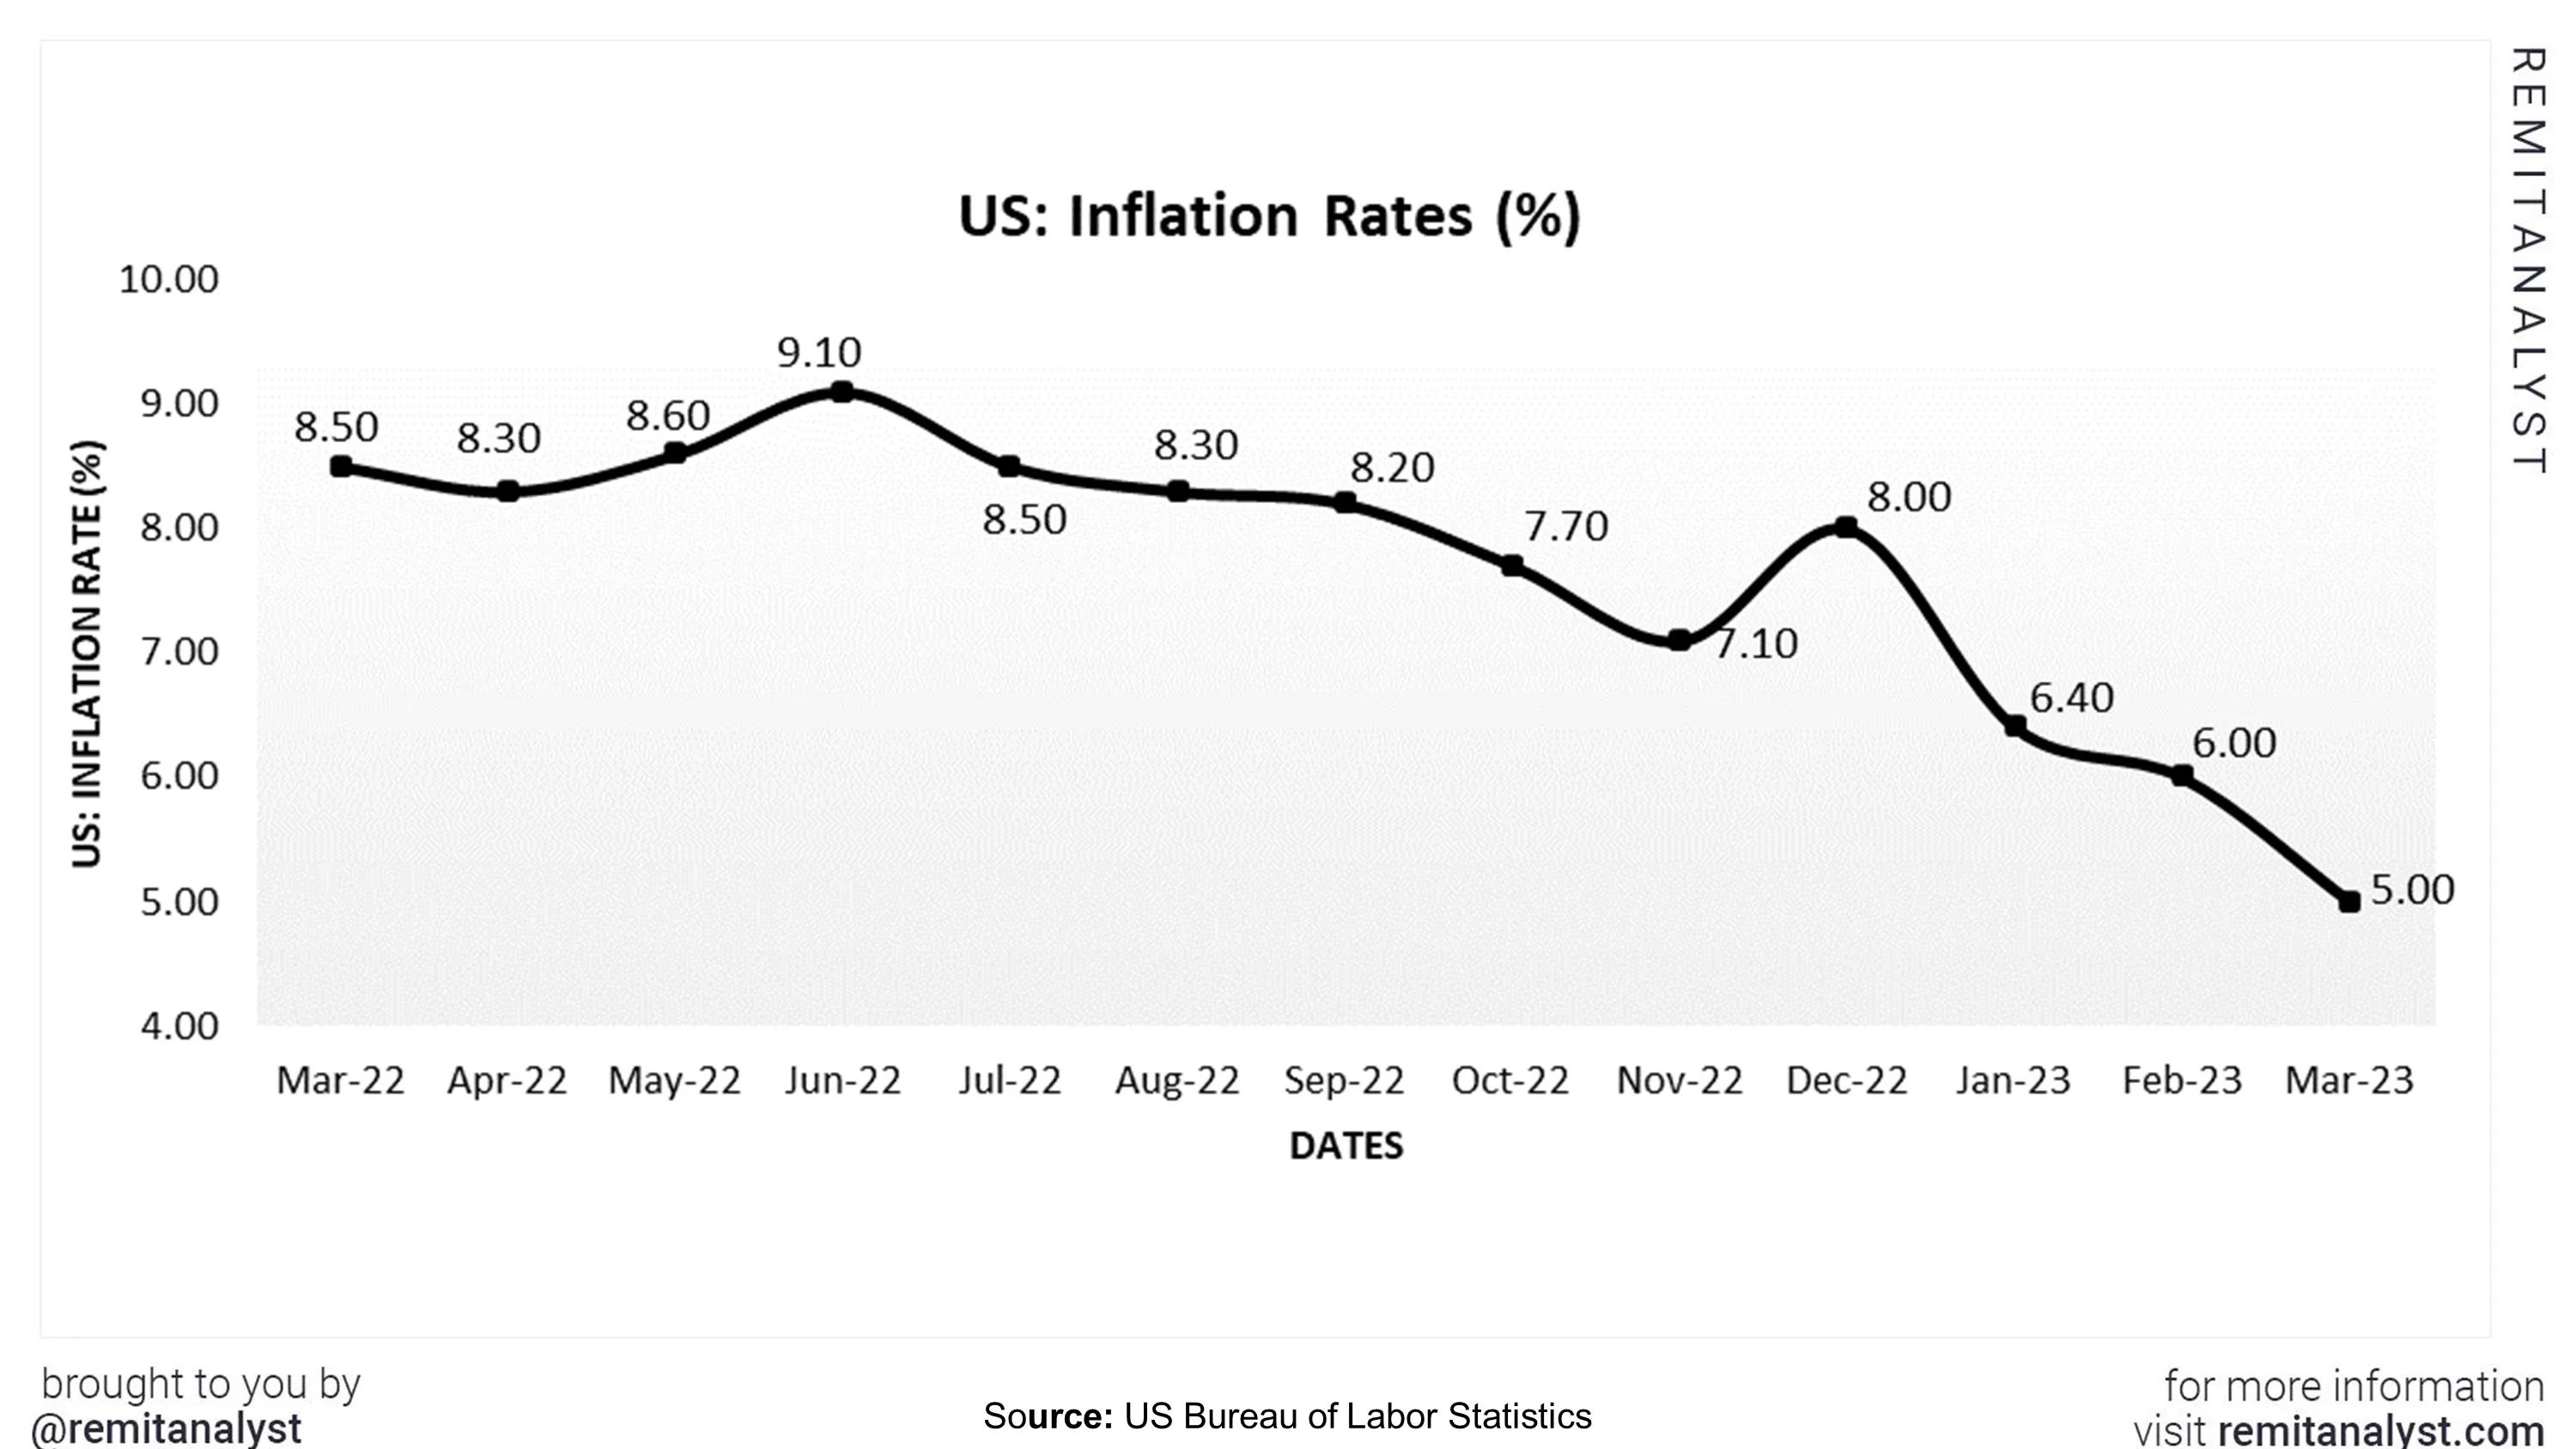 inflation-rates-in-us-from-mar-2022-to-mar-2023